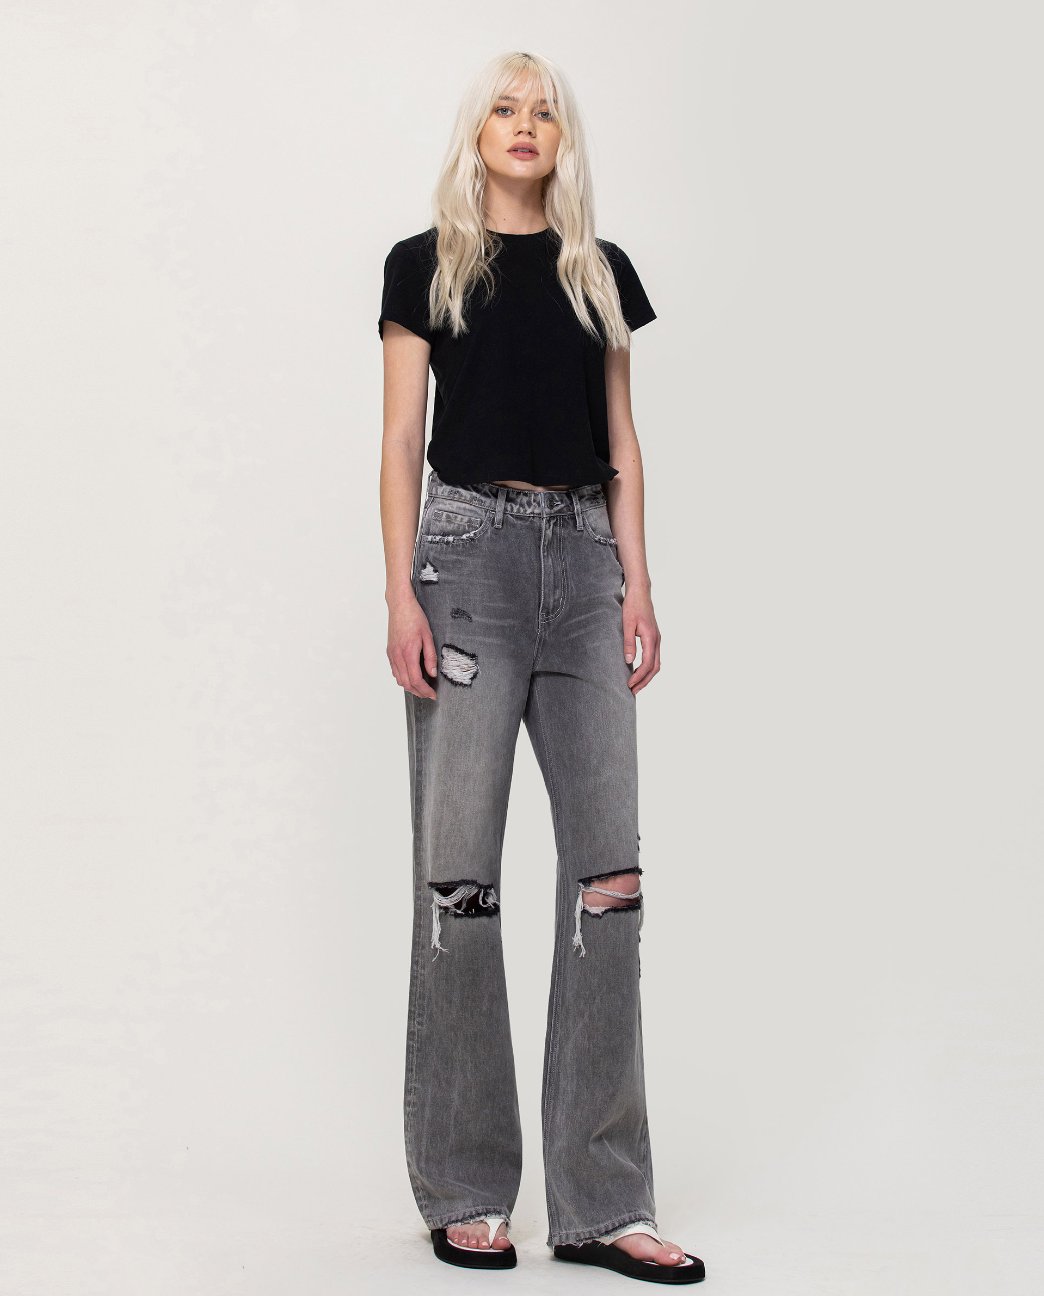 The Dark Side Flare Jeans